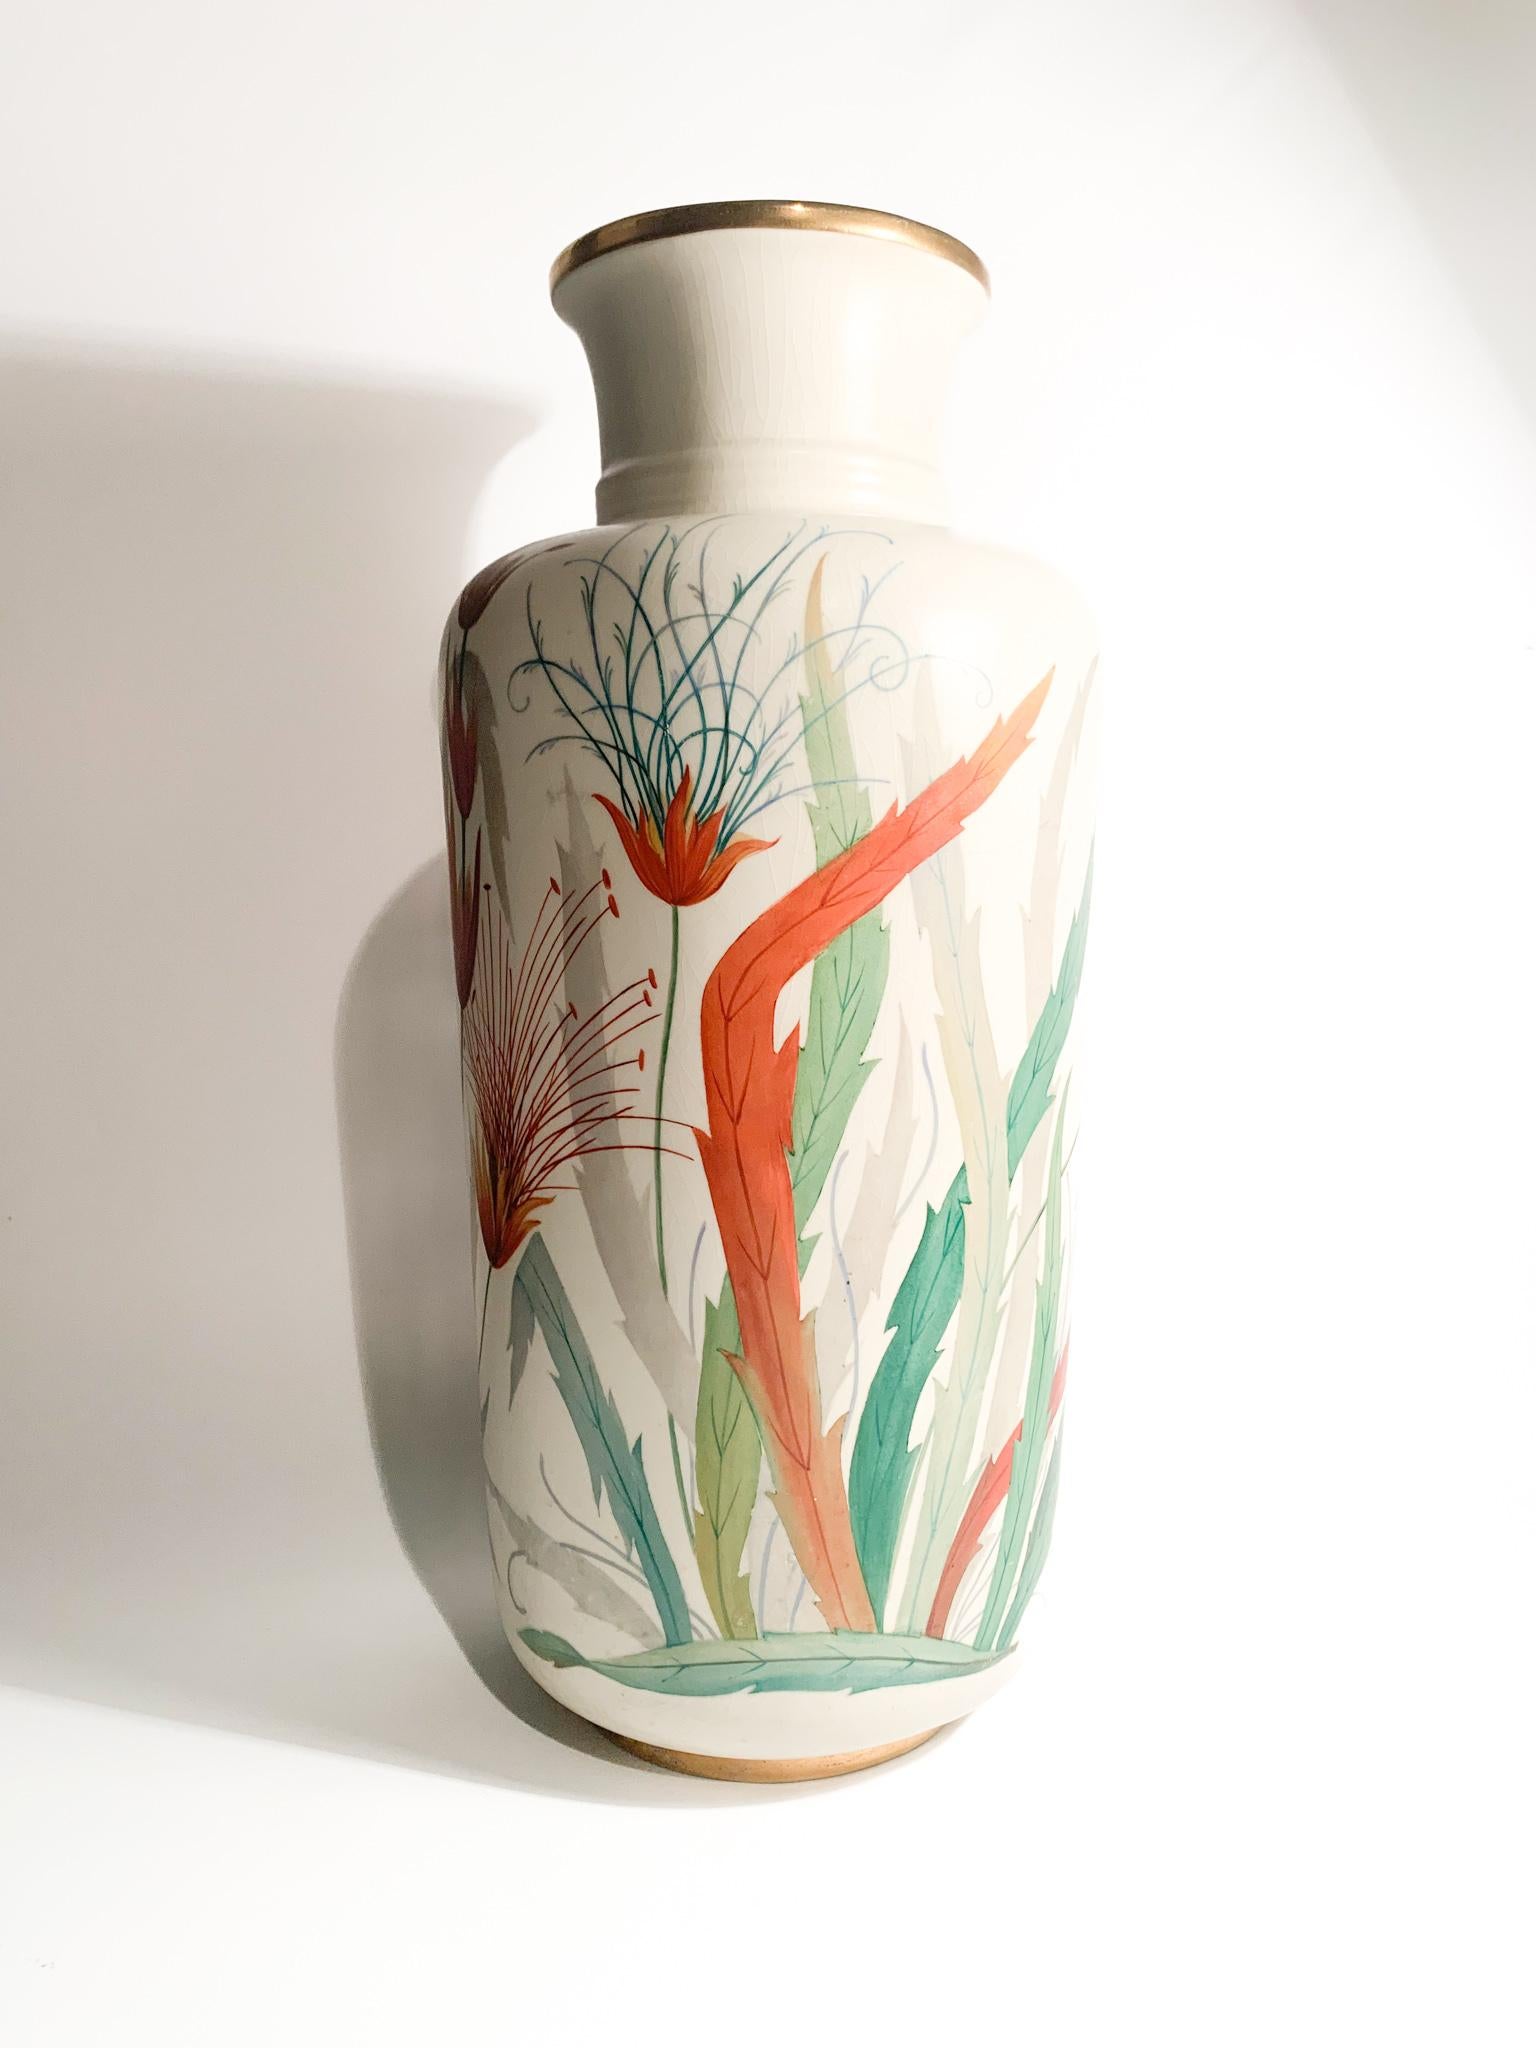 Ceramic vase by Richard Ginori hand-painted with floral motifs, made in the 1920s

Ø 20 cm h 46 cm

Company of Lombard origin founded in 1896 when the Marquis Carlo Ginori, passionate about white gold, arrived in Doccia to build a porcelain factory.